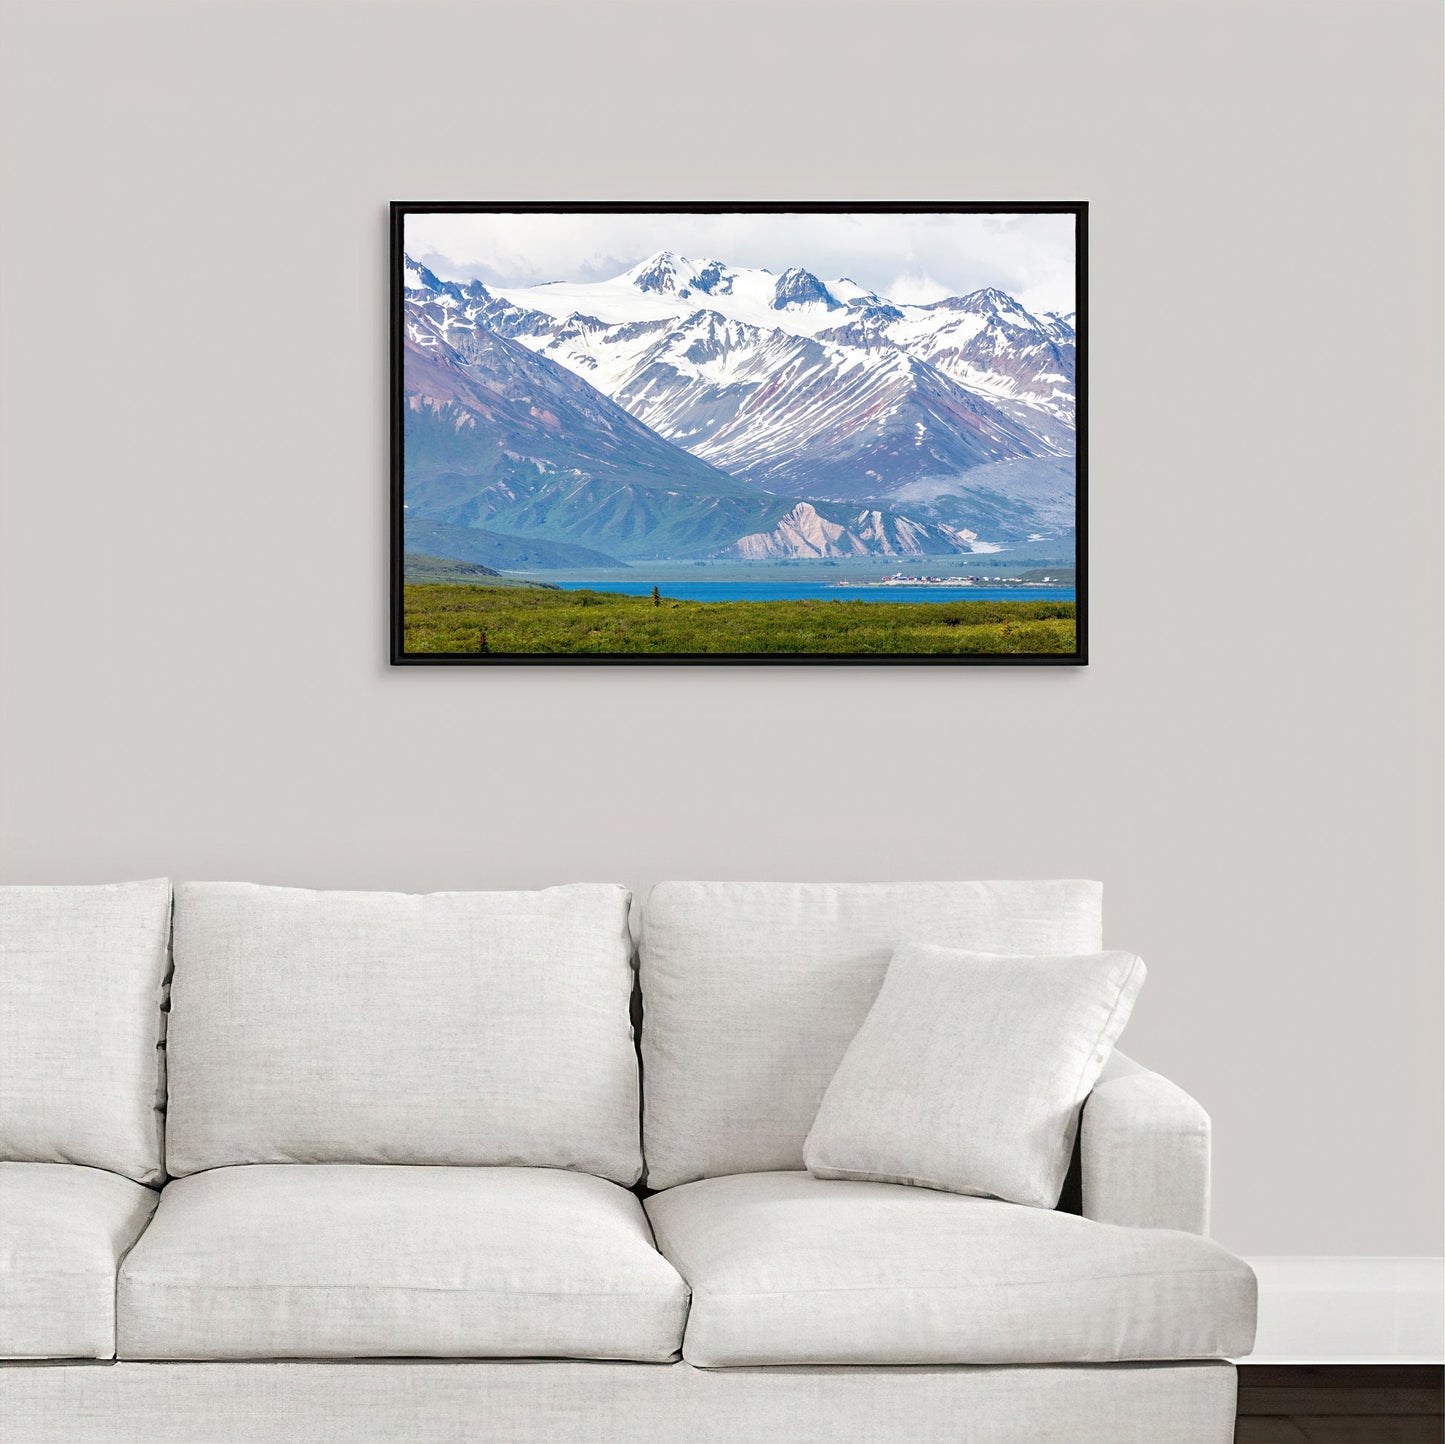 Alaska photo print, mountains and lake photo, mountains photography, Alaska wall art, Alaska decor, paper or canvas picture, 5x7 to 40x60"